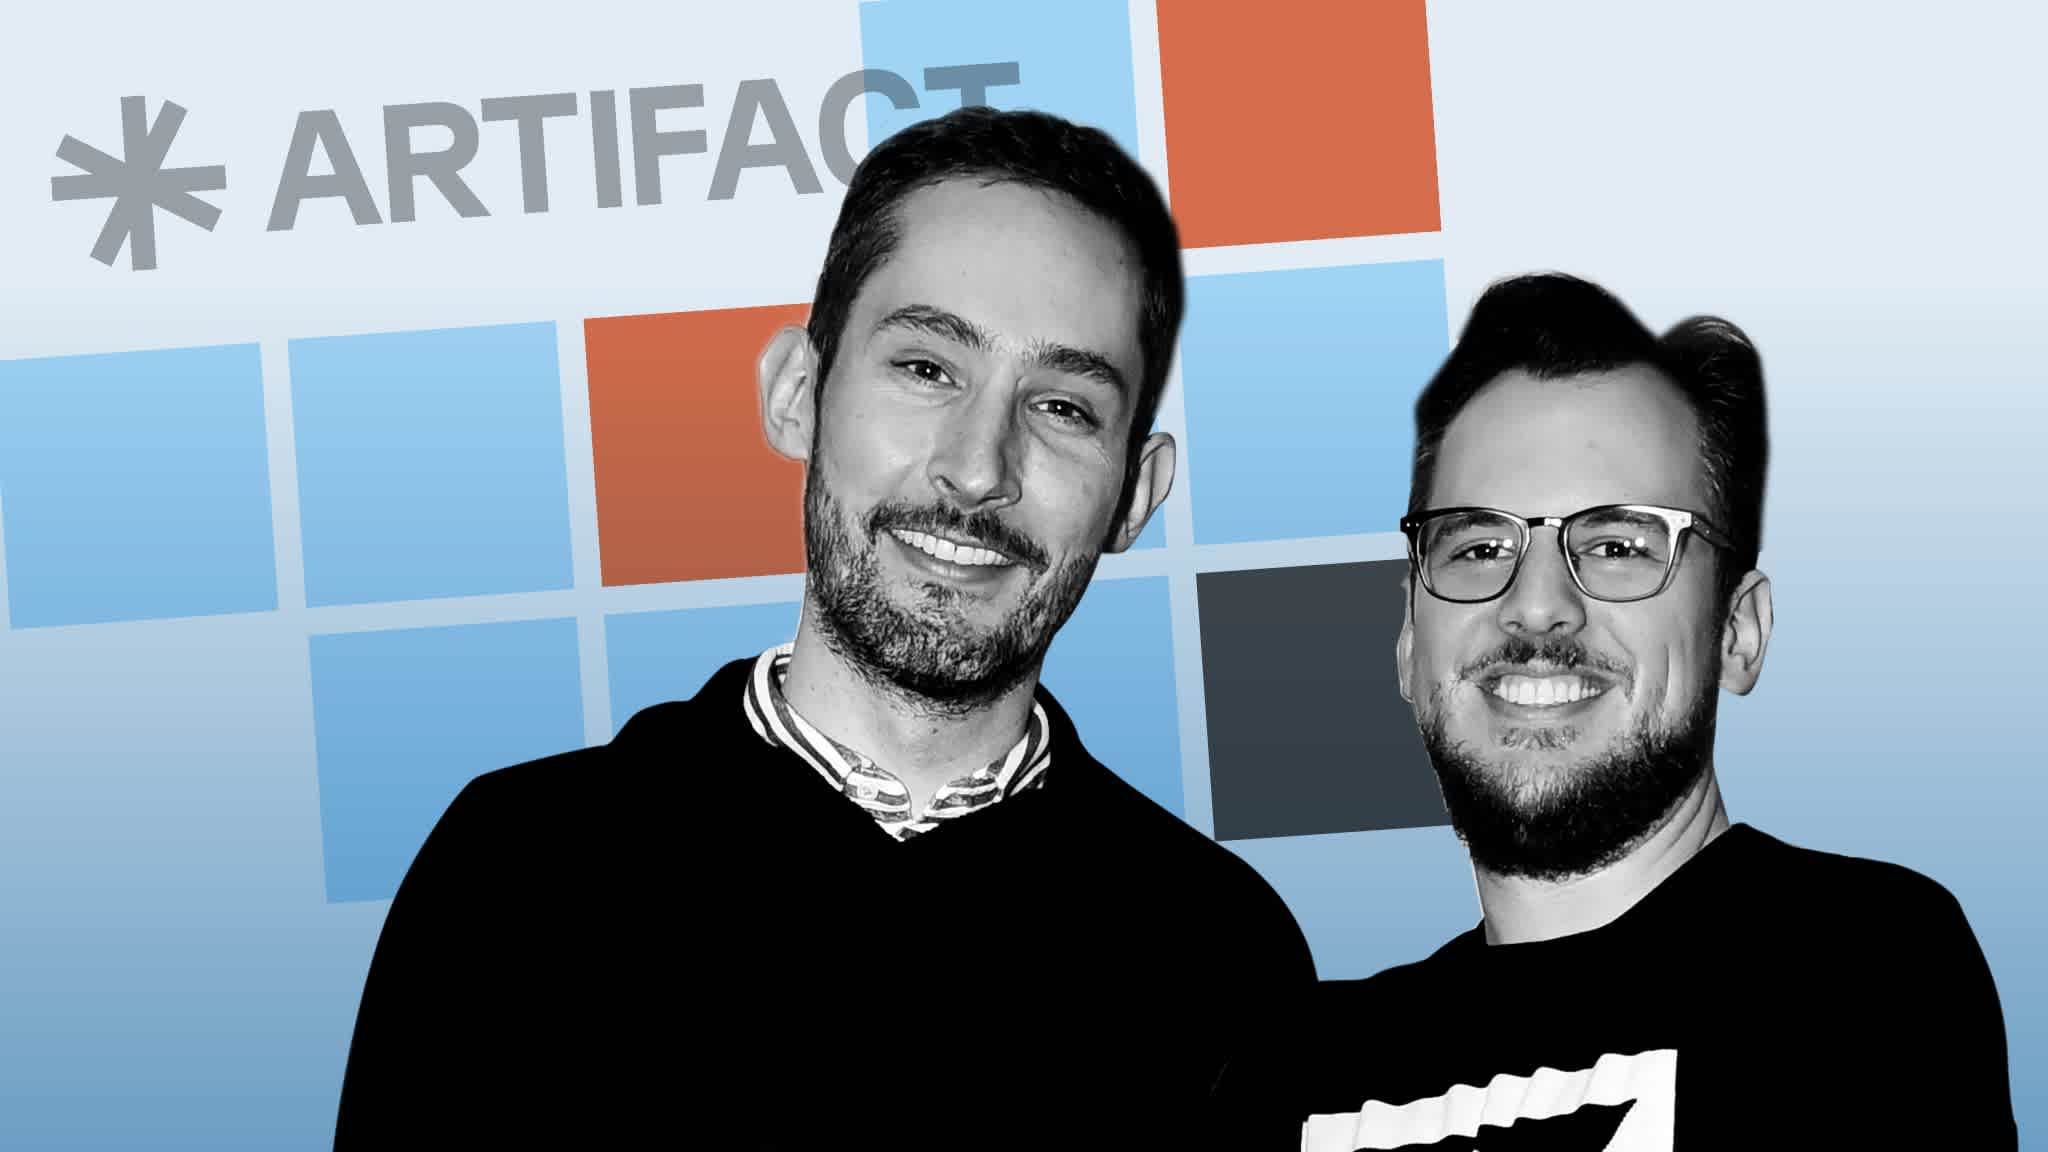 Instagram founders launch Artifact to rival Twitter and tackle misinformation